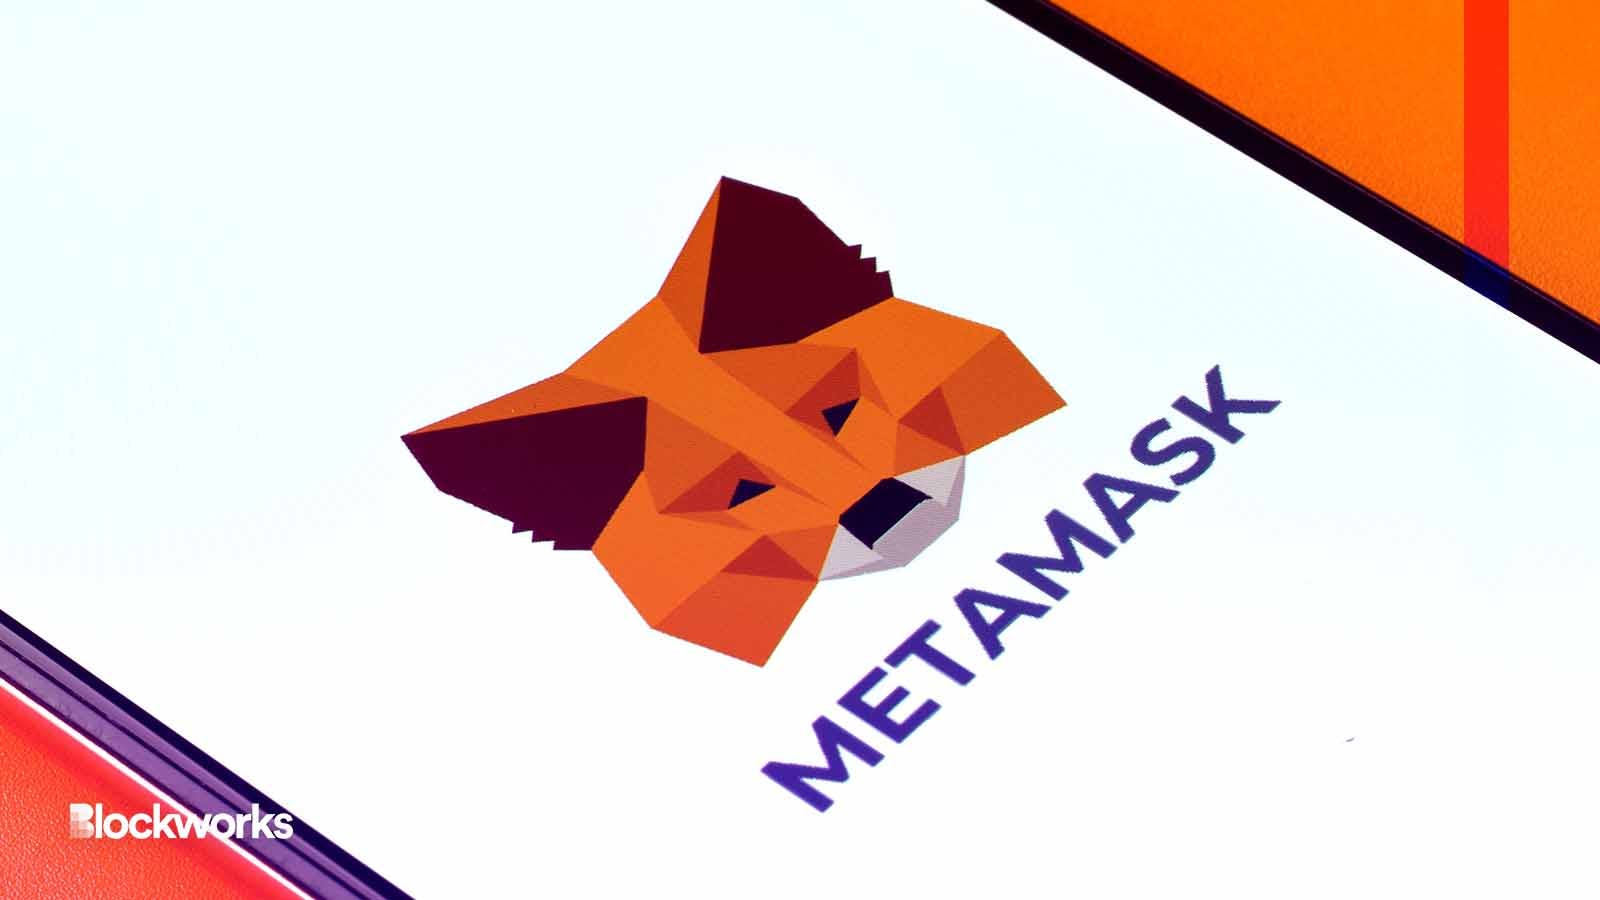 7,000 MetaMask Users Targeted in Security Breach, ConsenSys Says - Blockworks